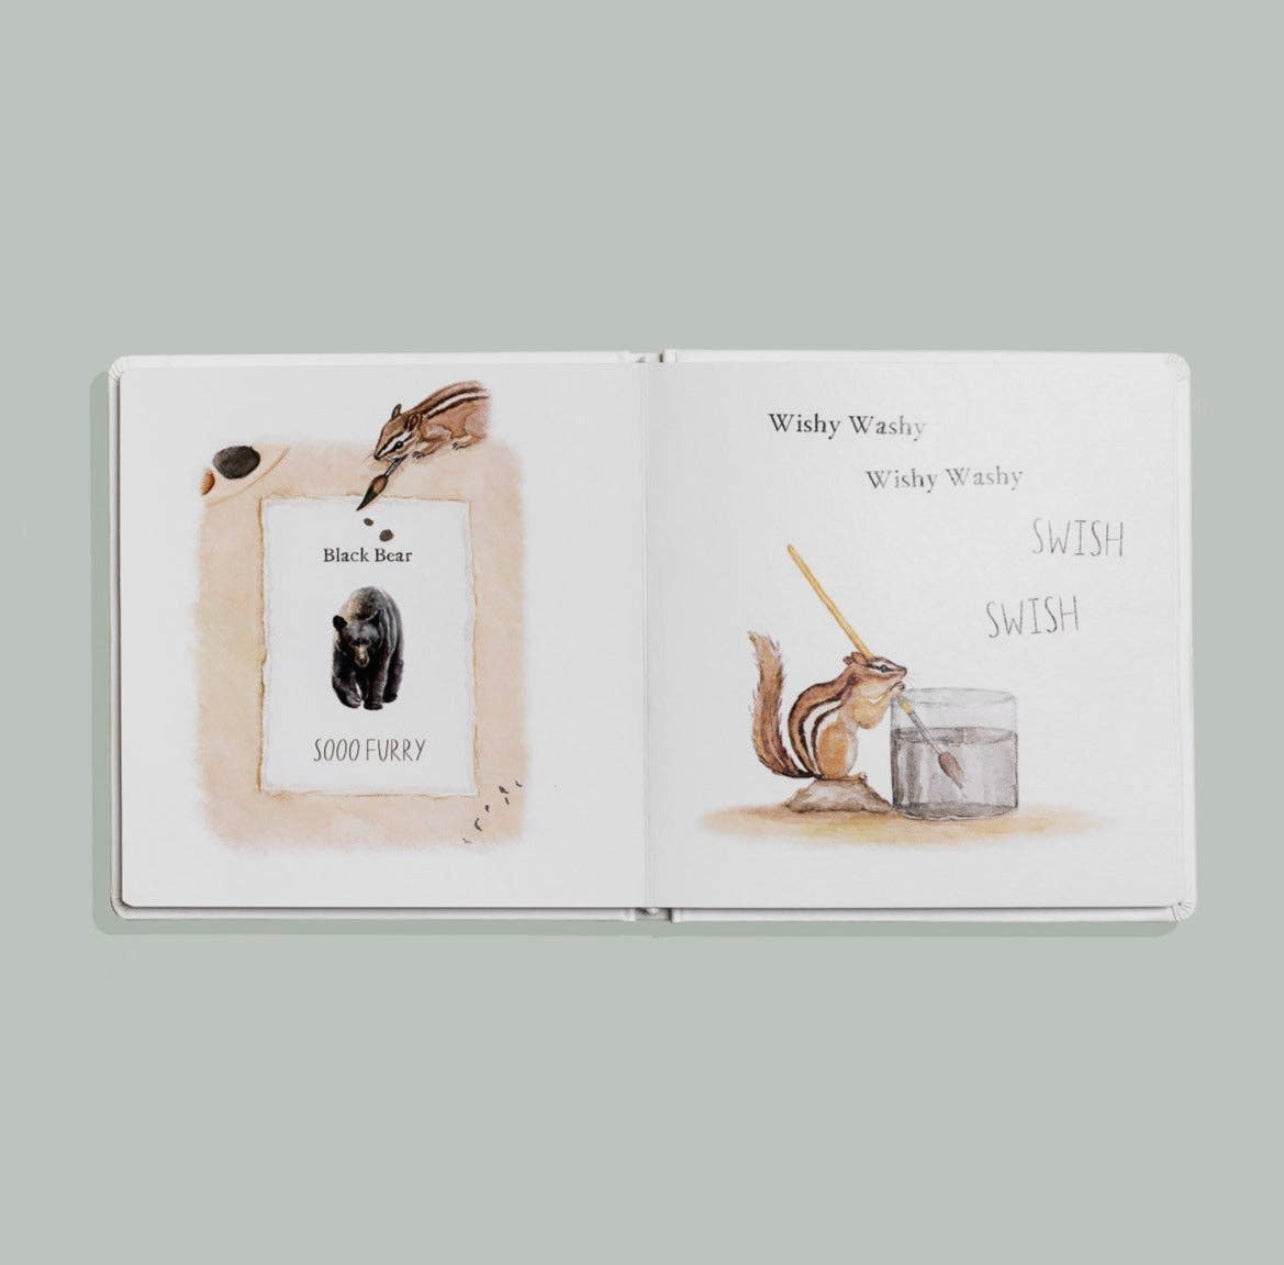 Wishy Washy - First Words and Colors Book